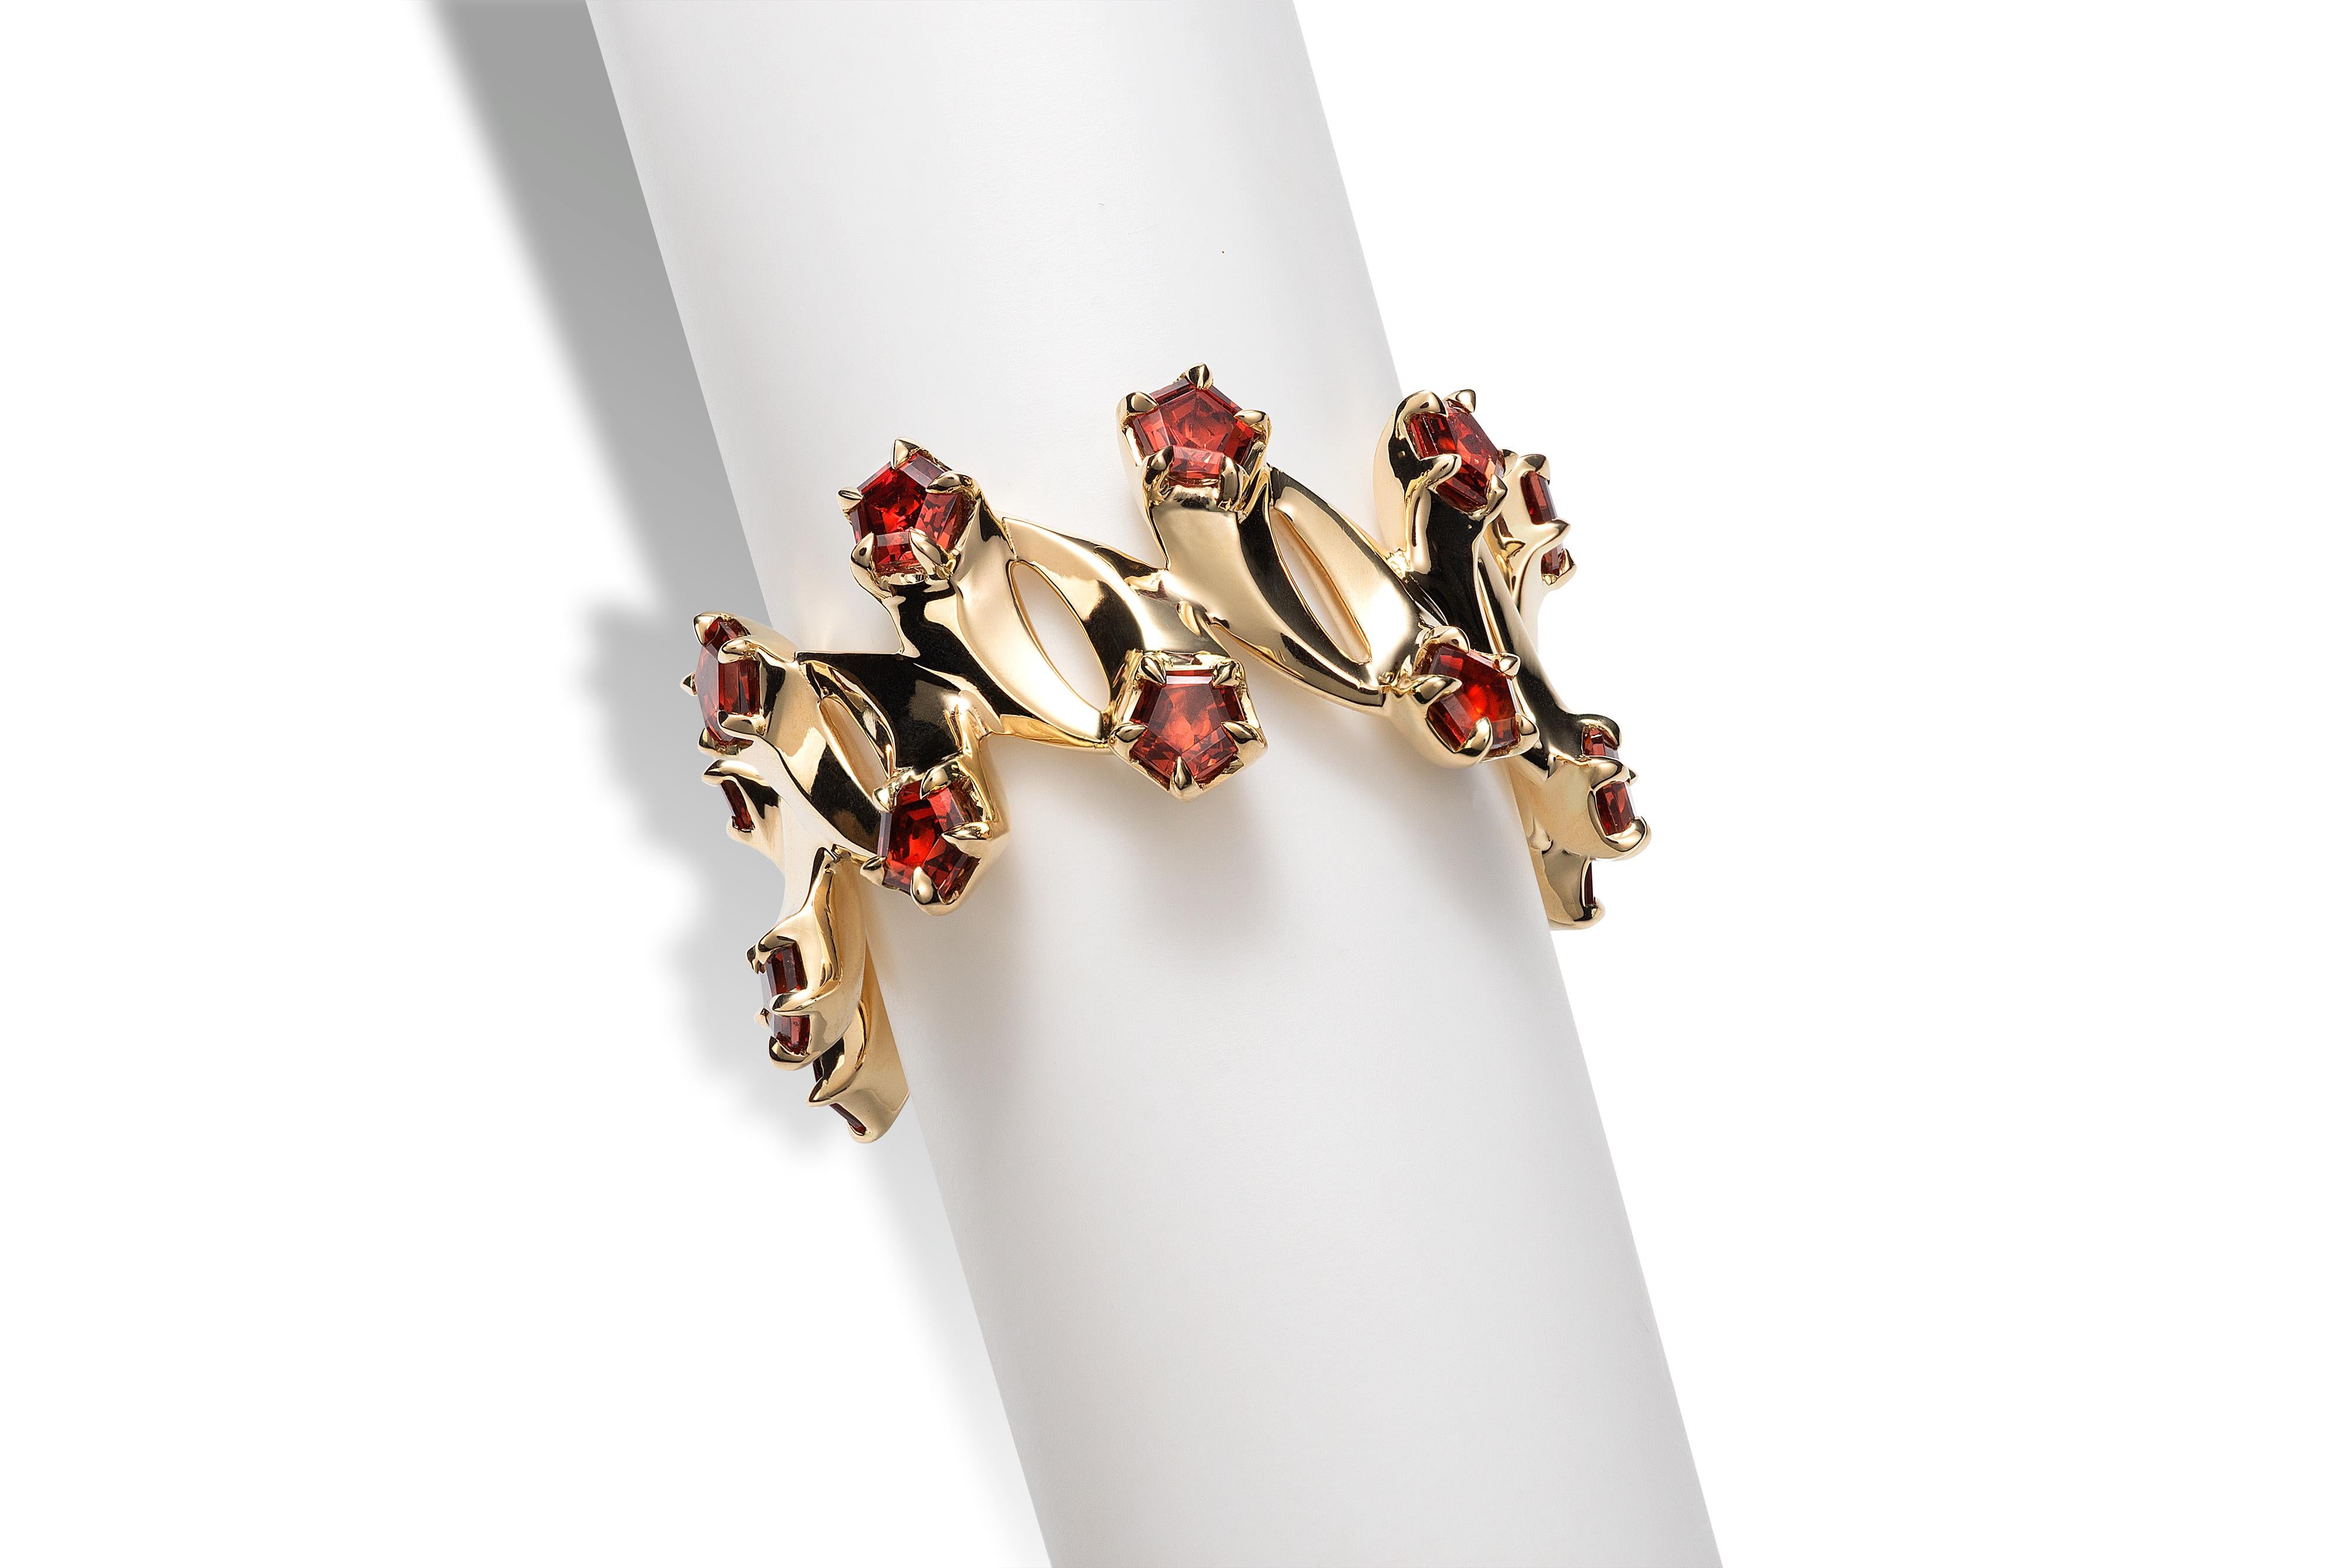 The 14k and Madeira Garnet ring is an eternity style ring with 18 connecting comets that wrap around your finger. The head of each comet is a fancy cut 3.5mm garnet.  (Wow - with 18 shooting stars on your finger, that gives you 18 wishes!!! ) The